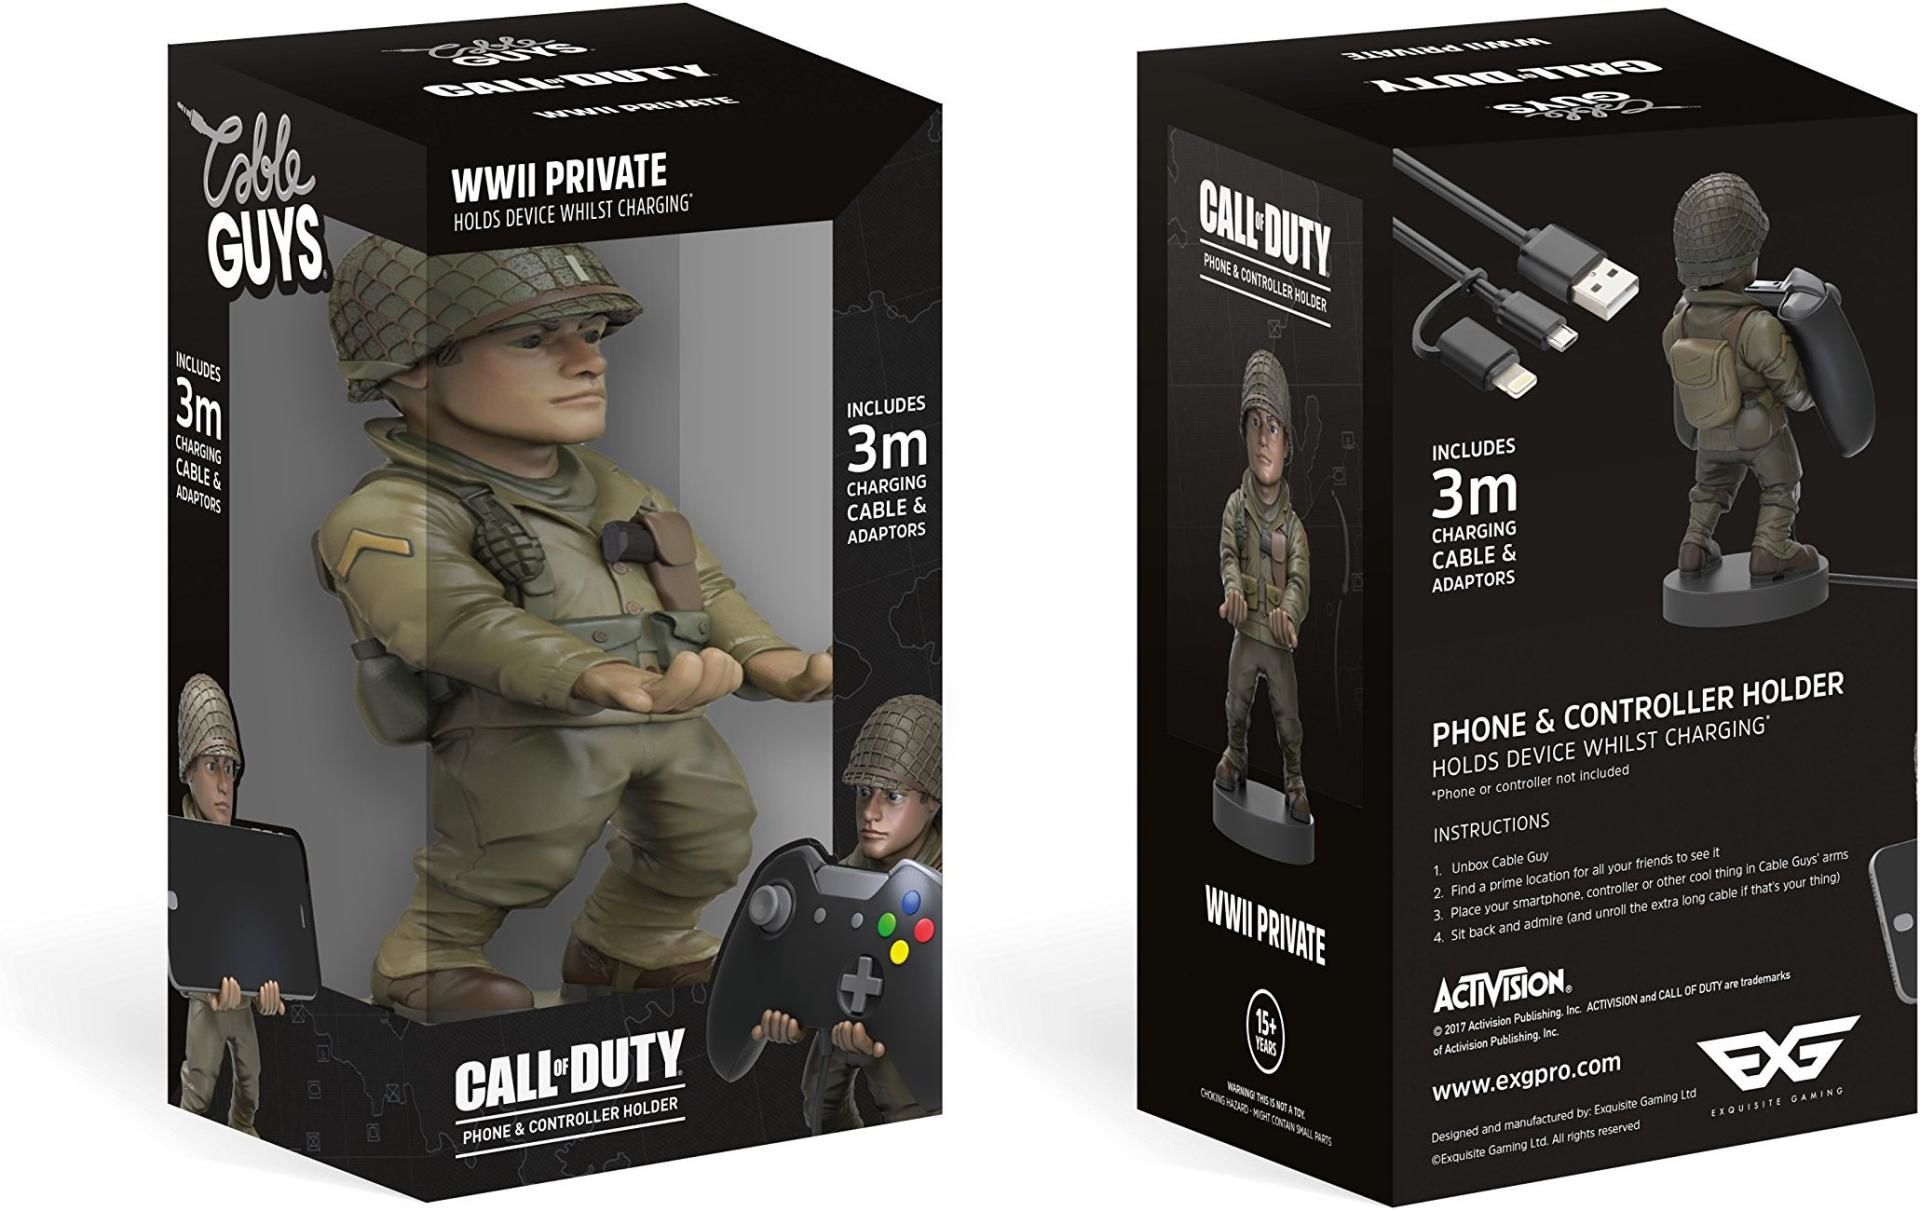 Call of Duty WWII Private Phone & Controller Holder